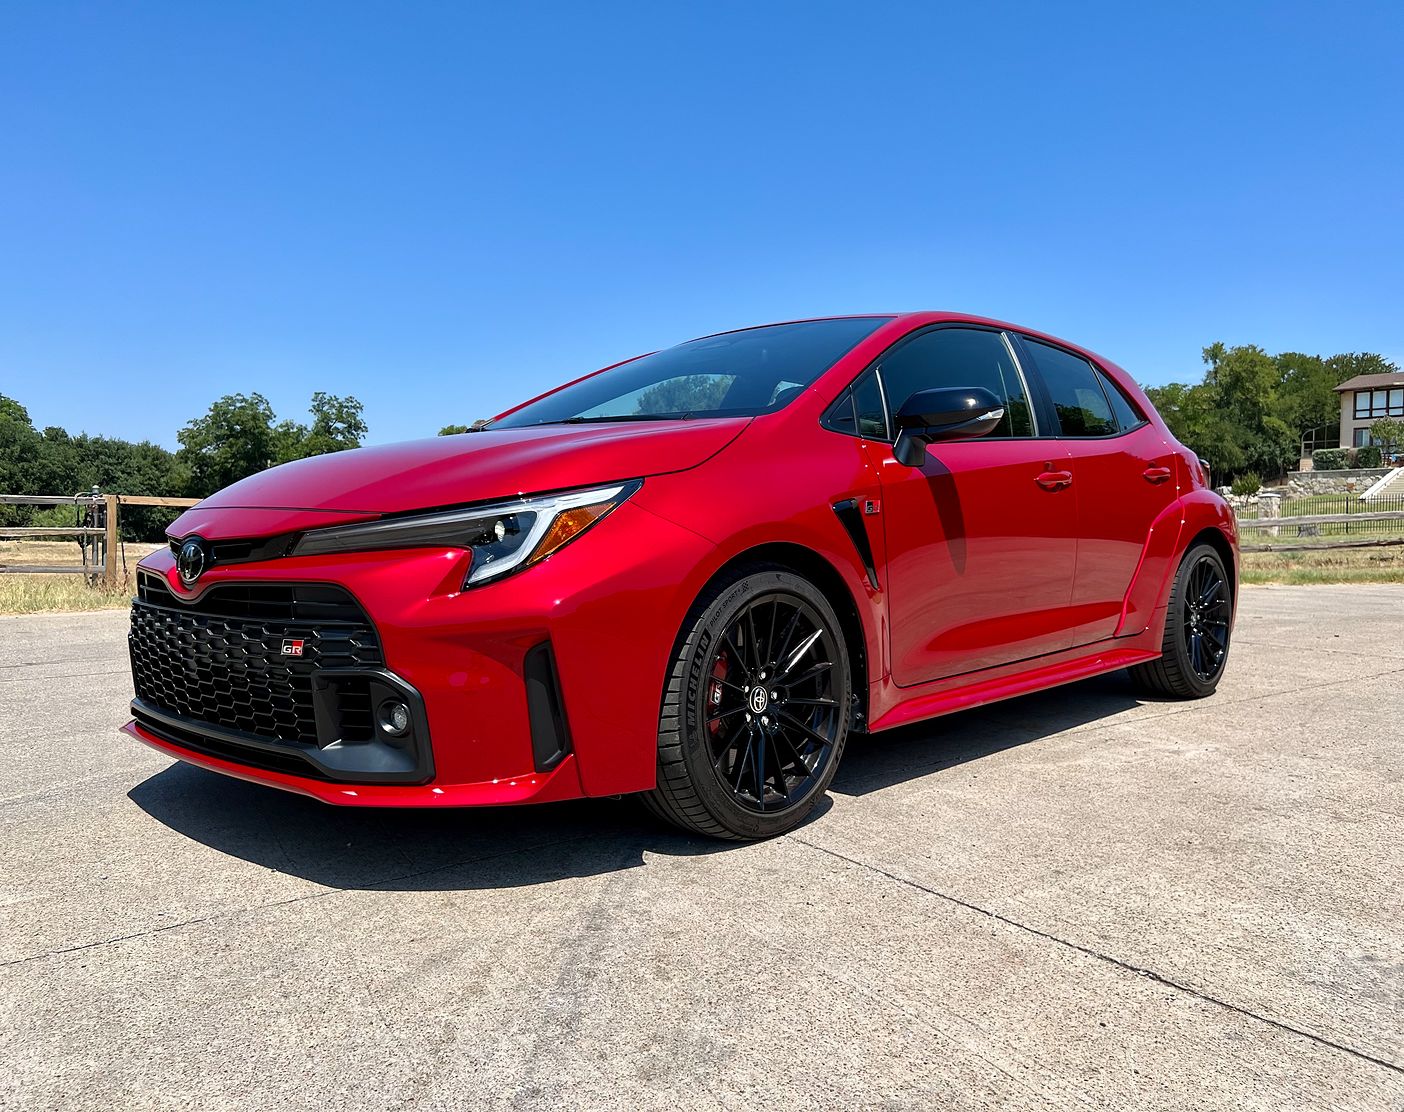 The Toyota GR Corolla is a high-performance hatchback